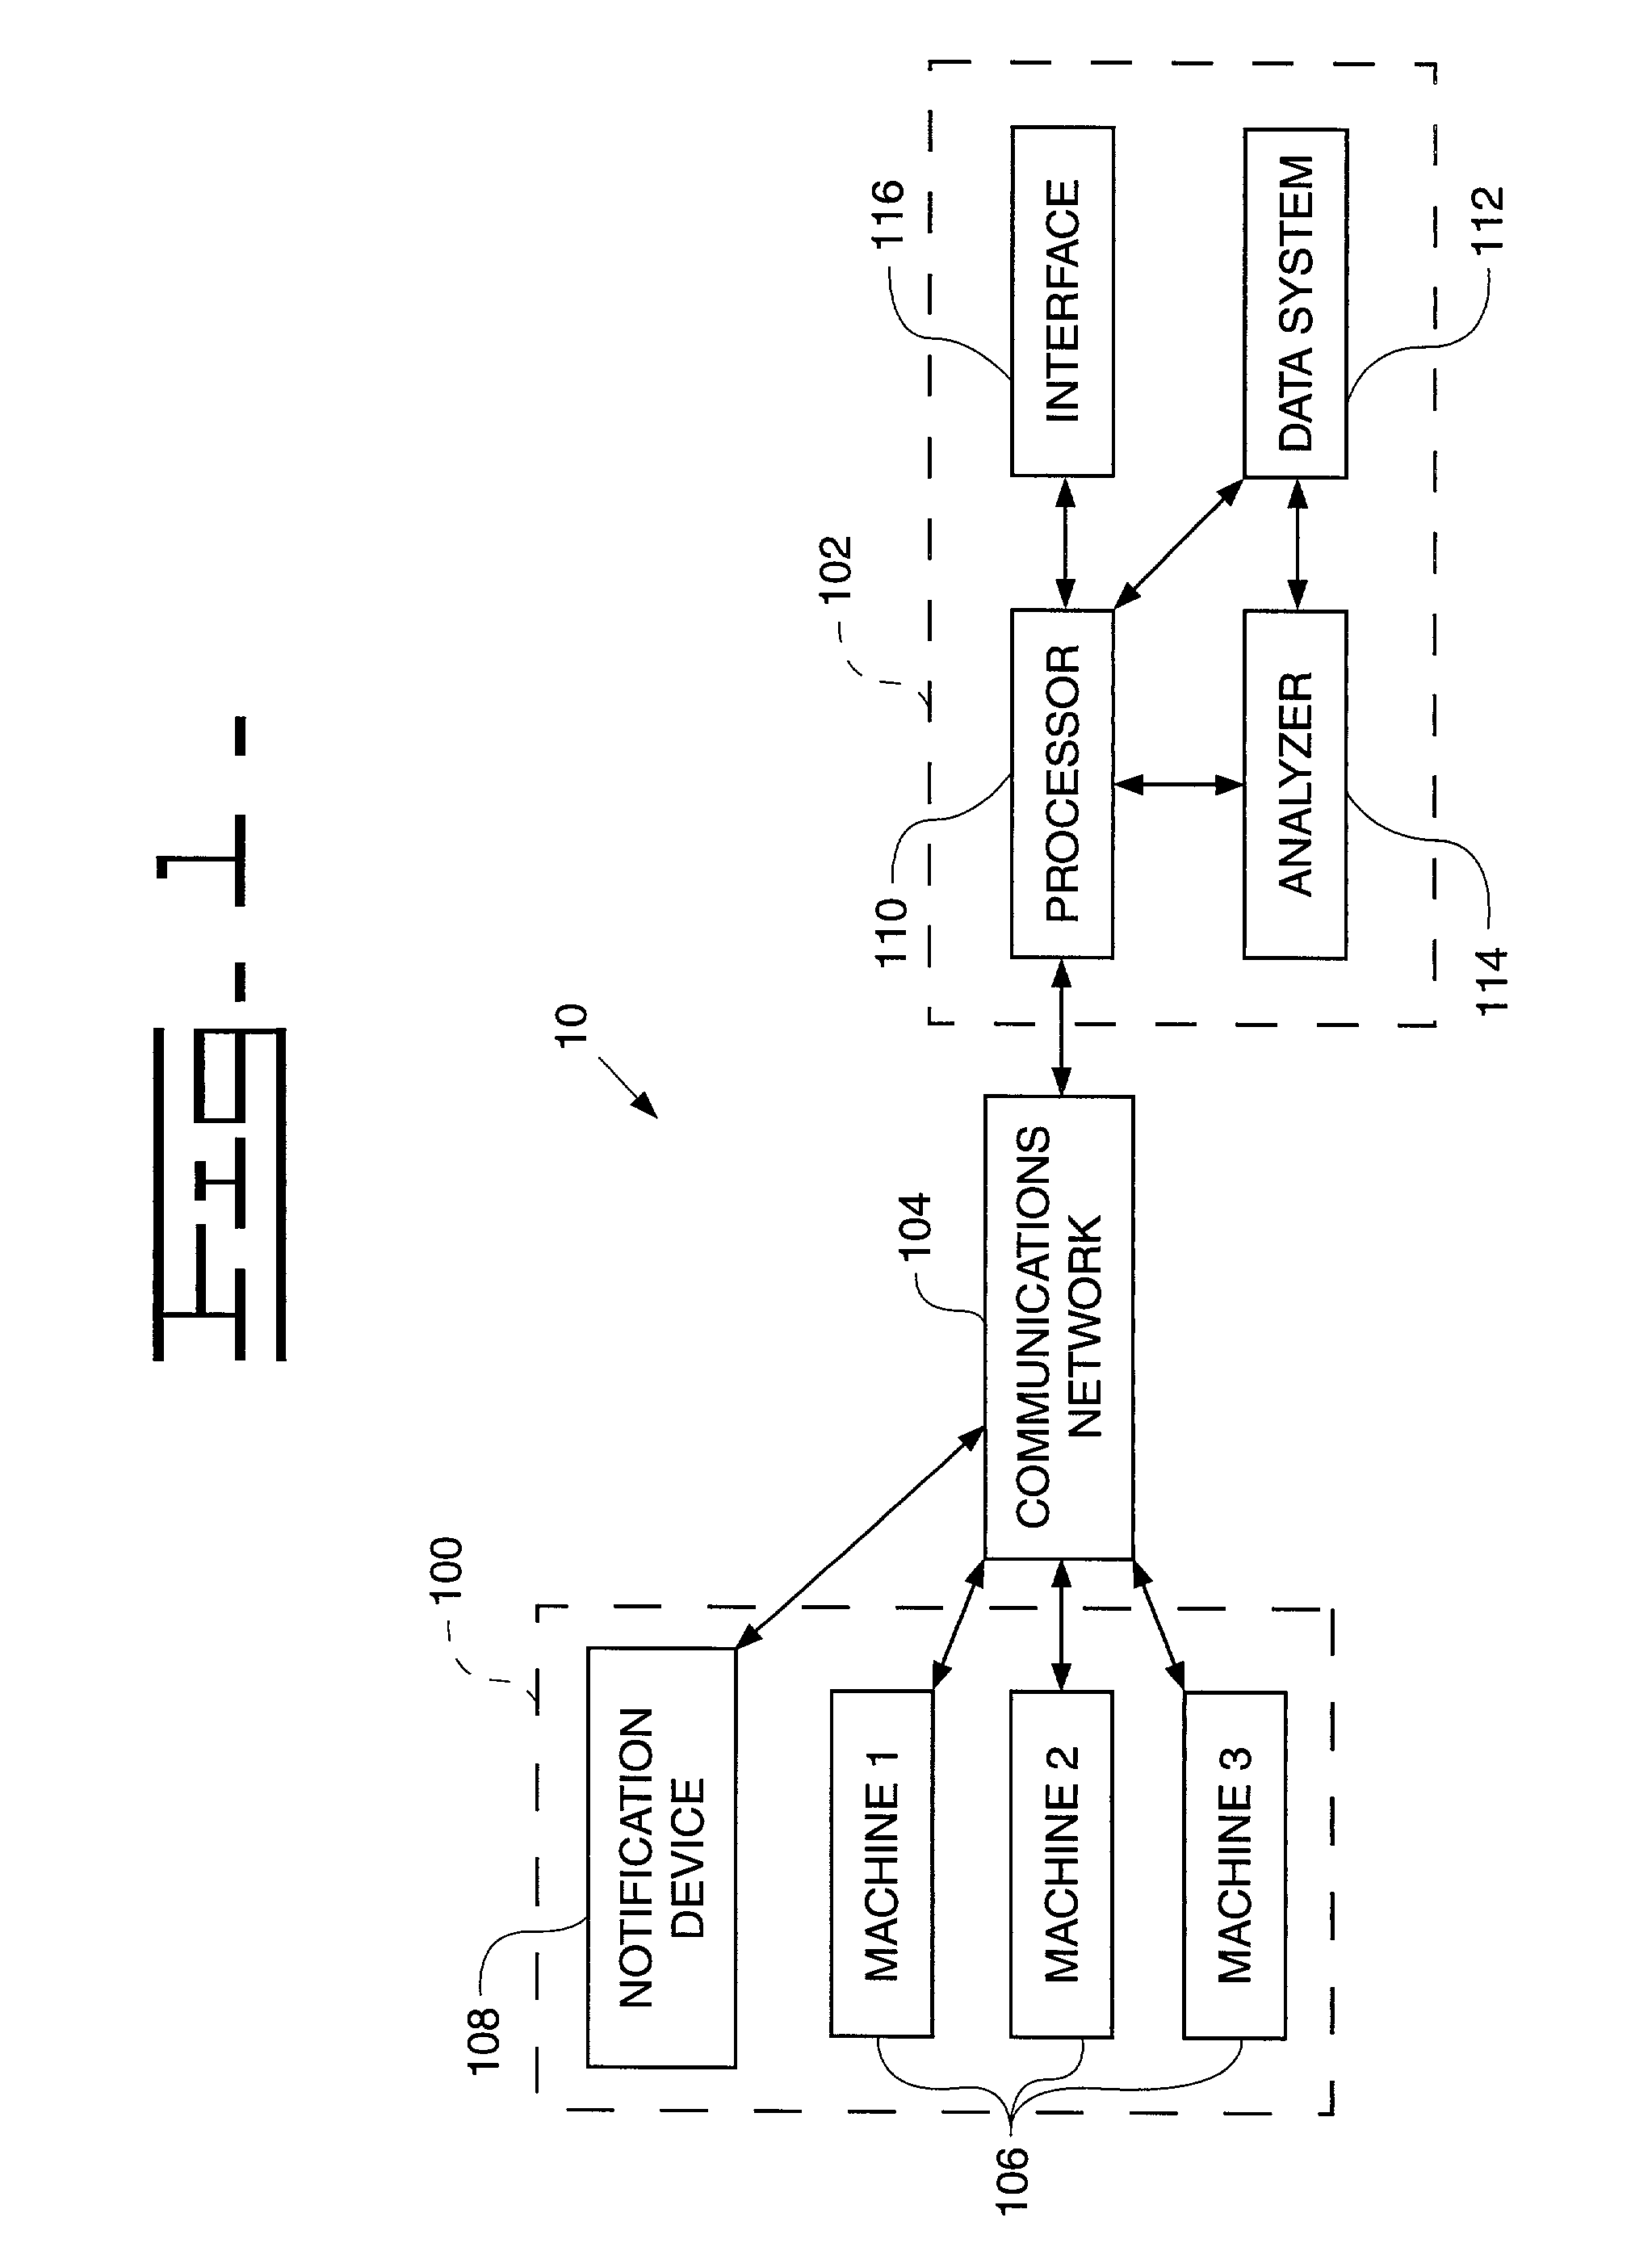 System and method for analyzing and reporting machine operating parameters